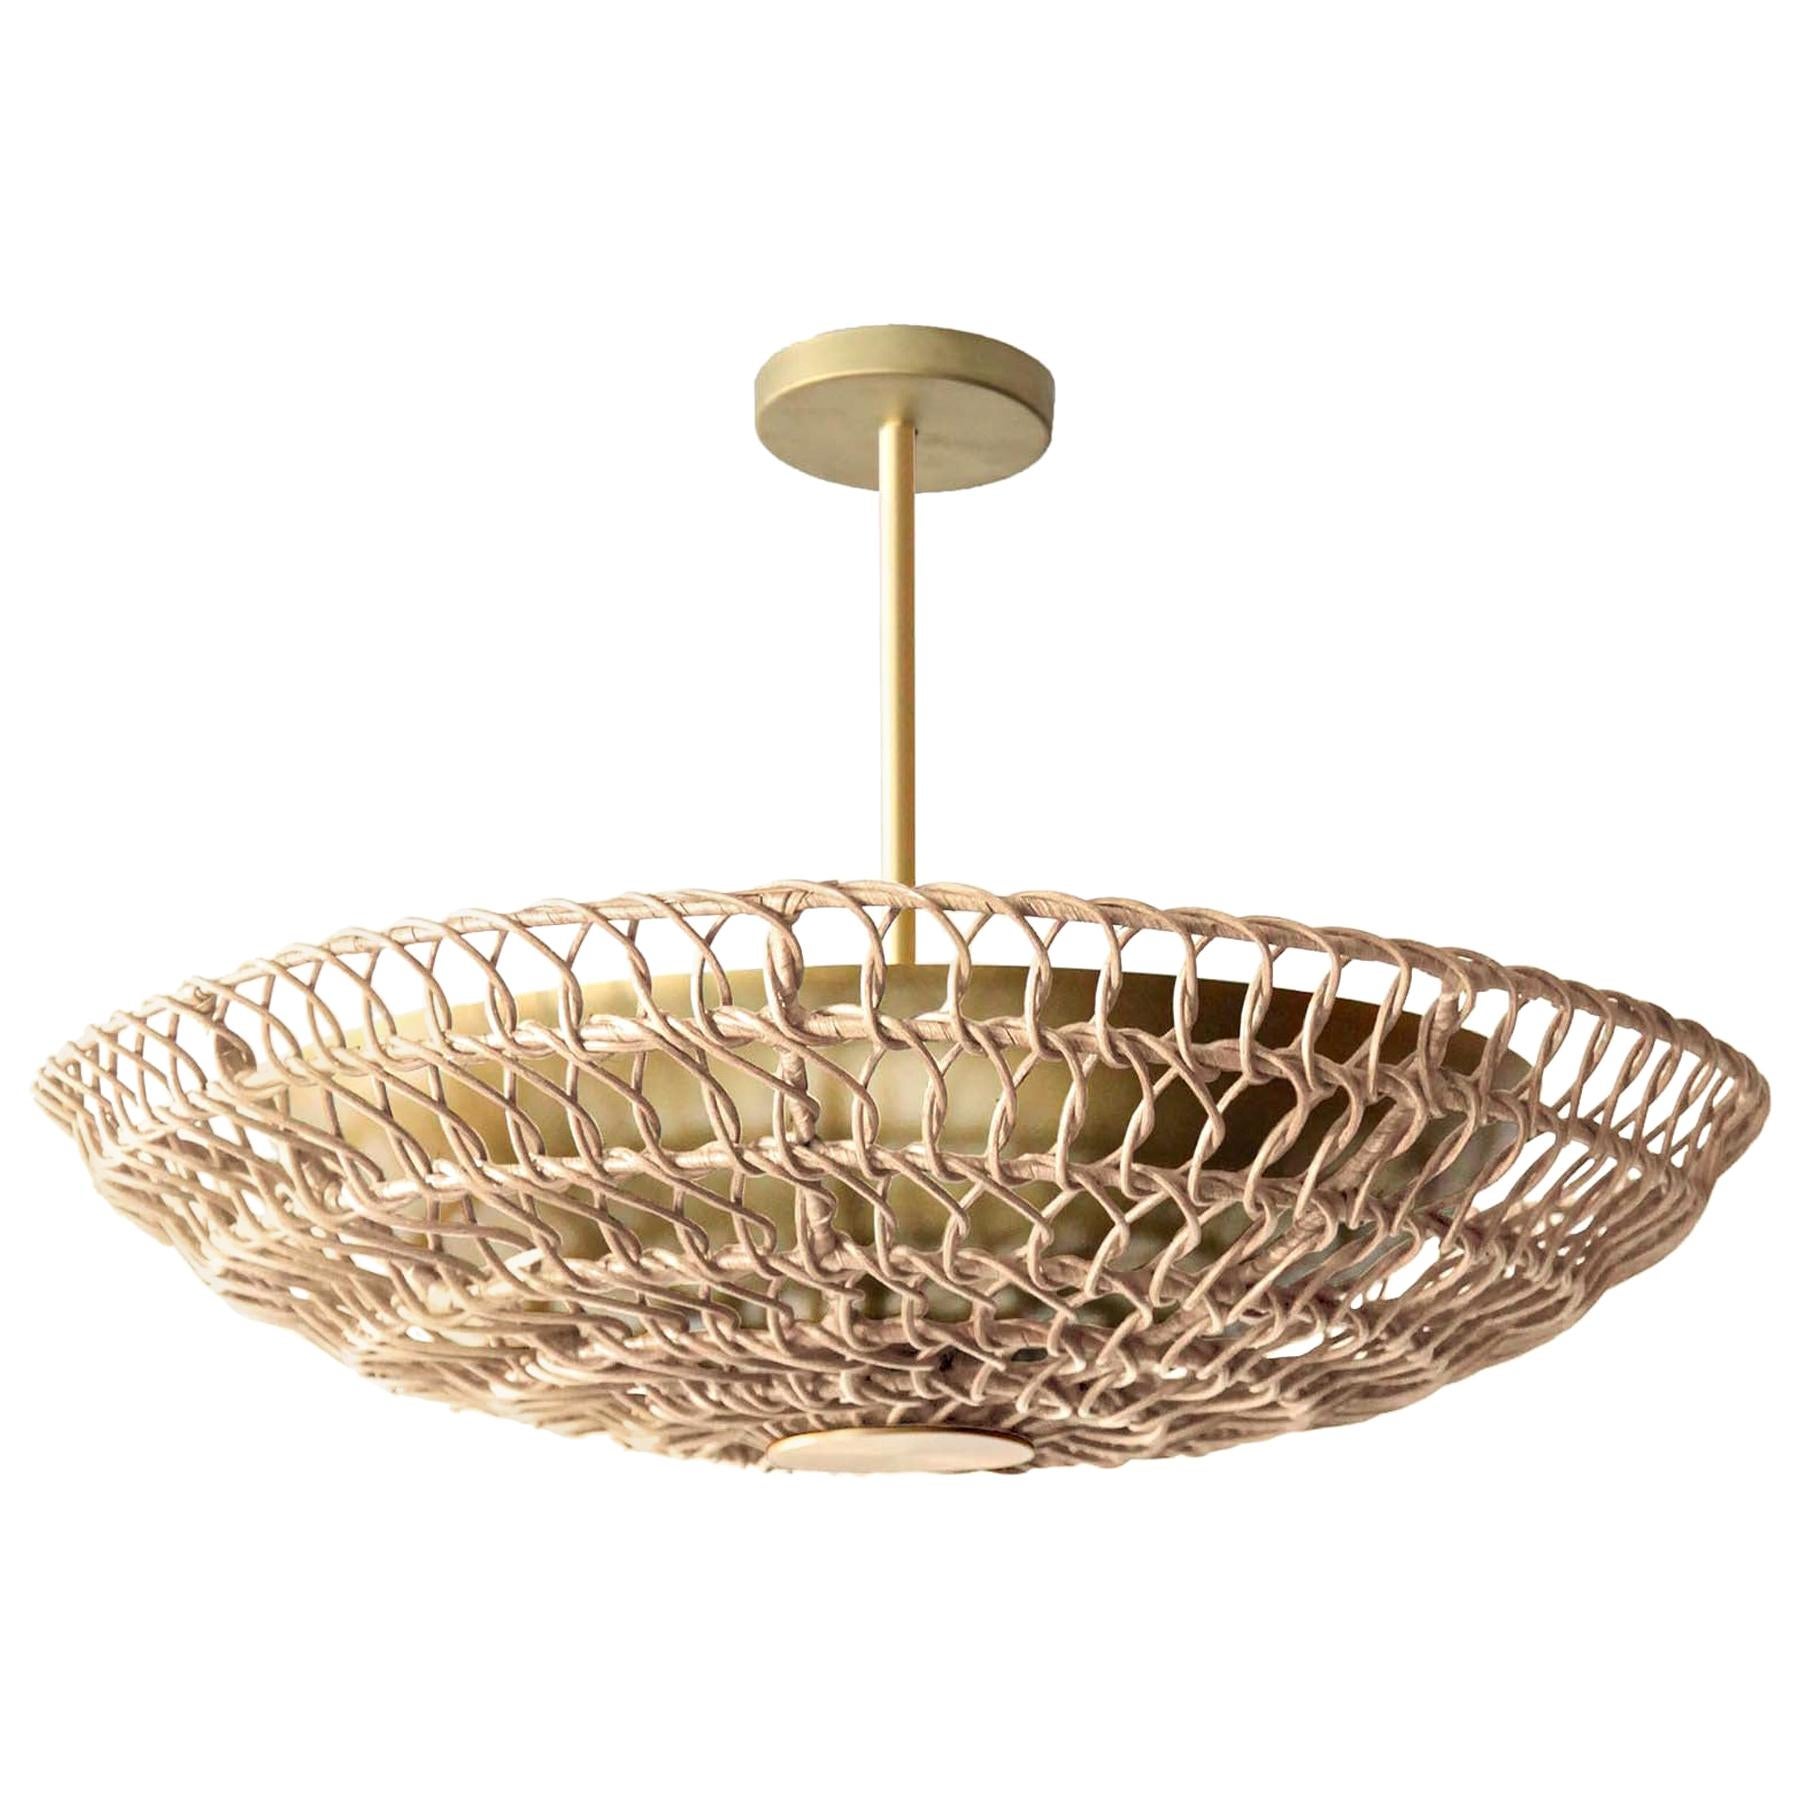 34" Pendant Light in Handwoven Natural Rattan, Ventila Collection For Sale